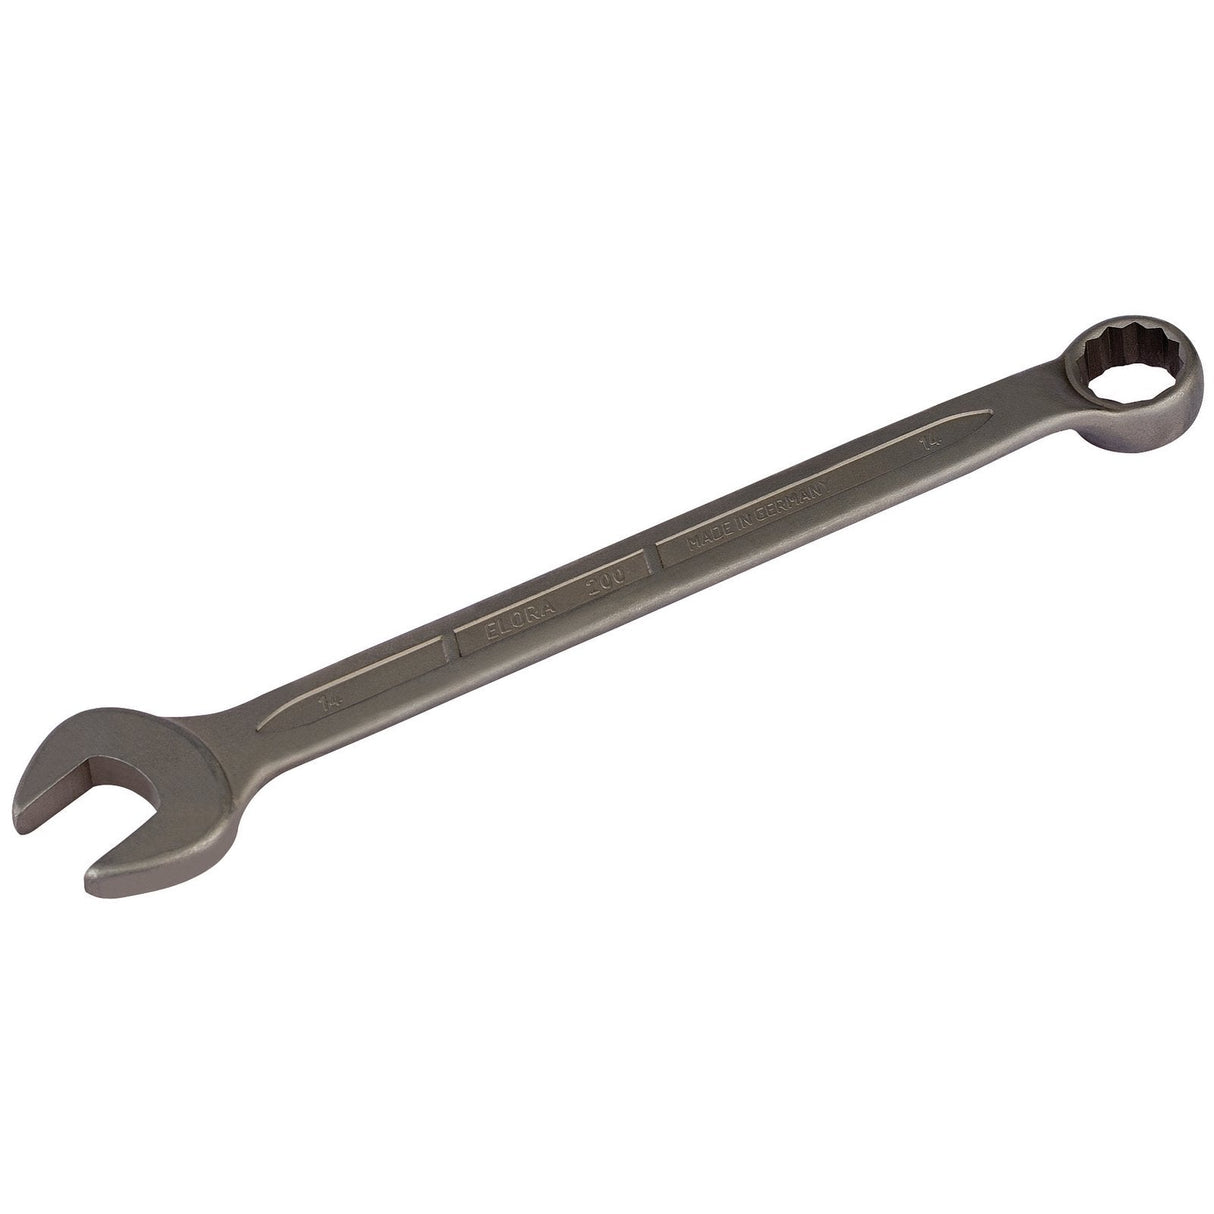 Draper Elora Long Stainless Steel Combination Spanner, 14mm - 200-14 - Farming Parts